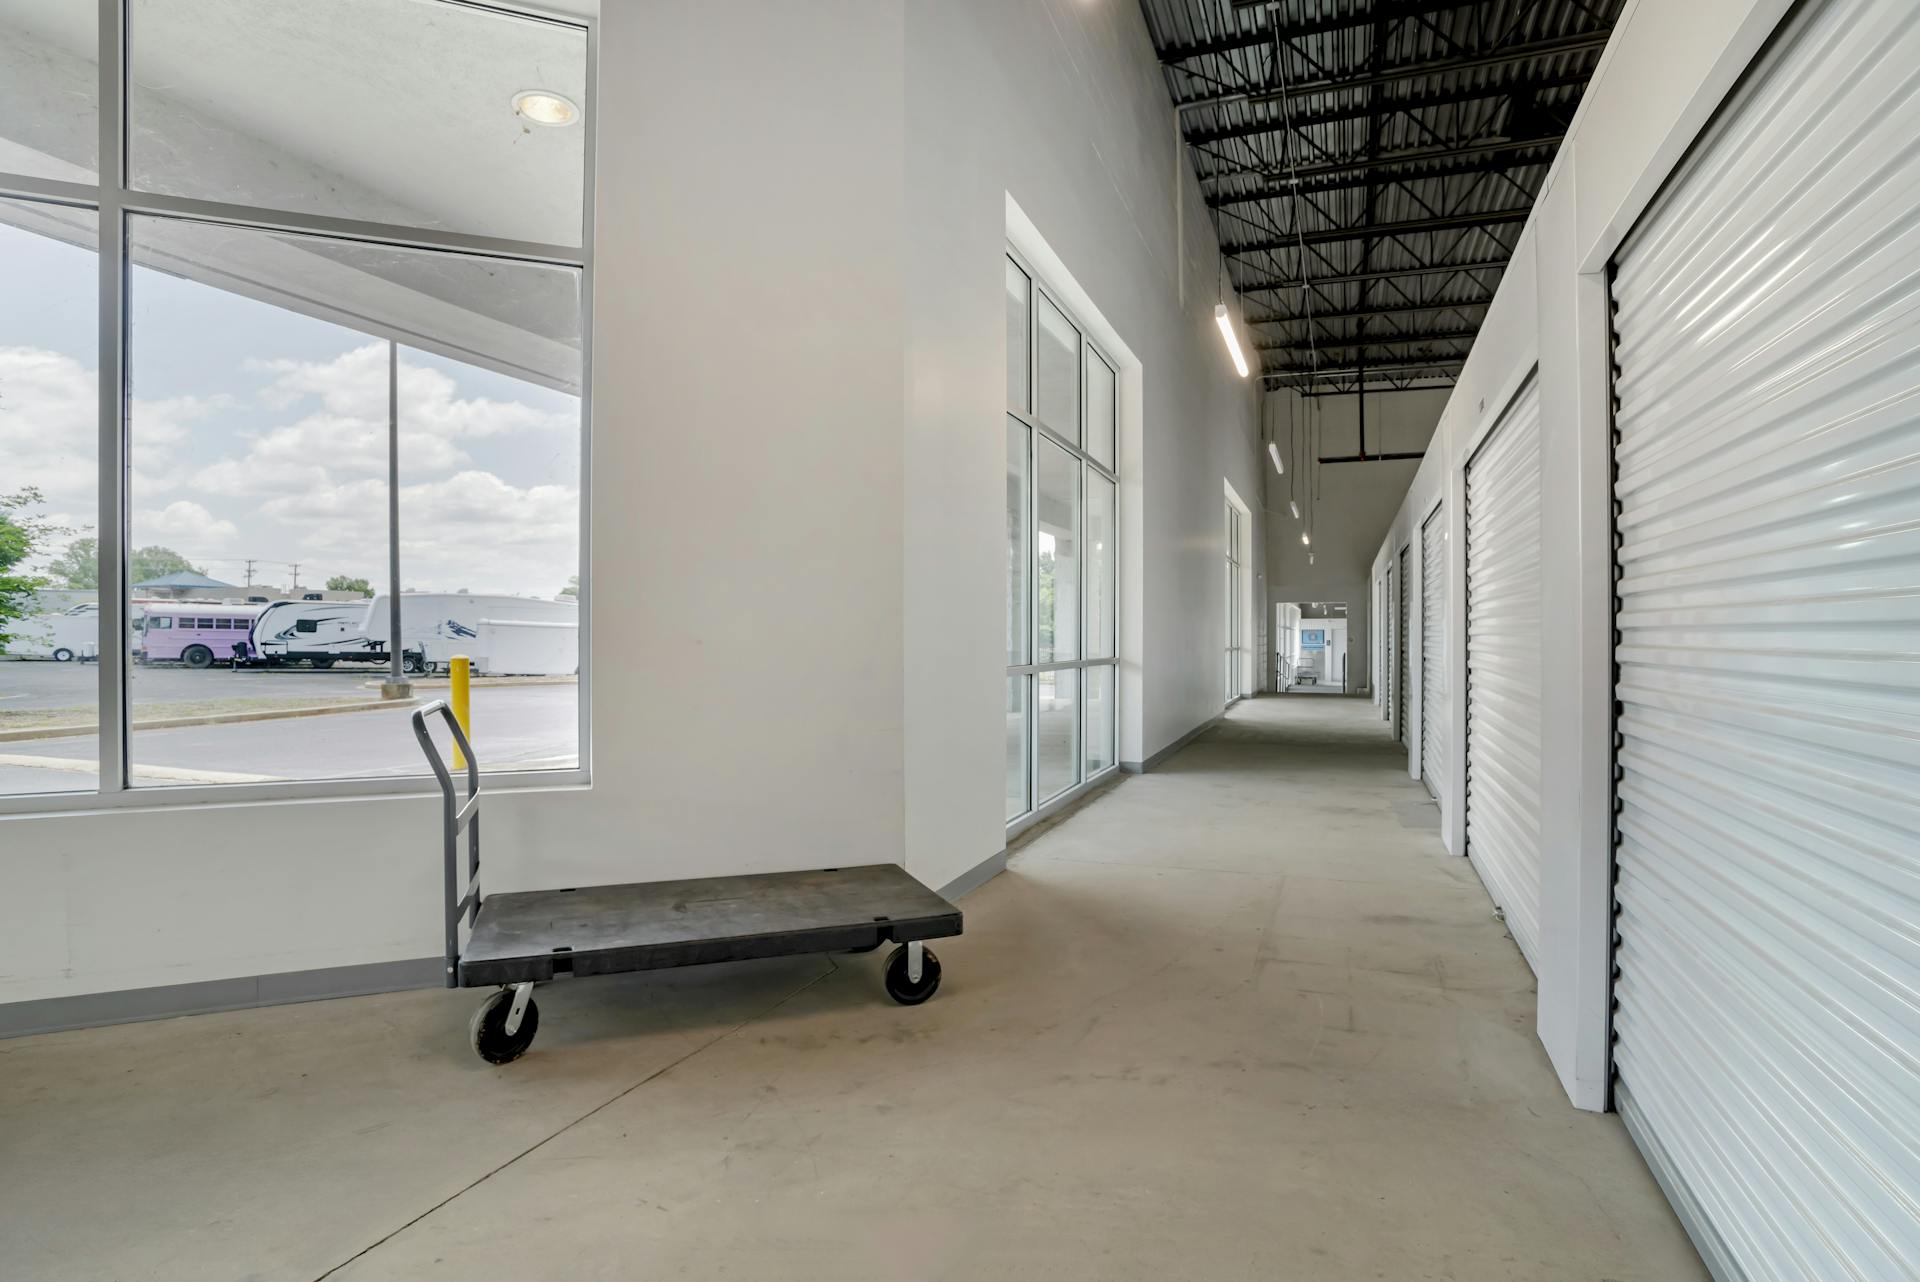 StoreEase Anderson storage hallway with moving cart